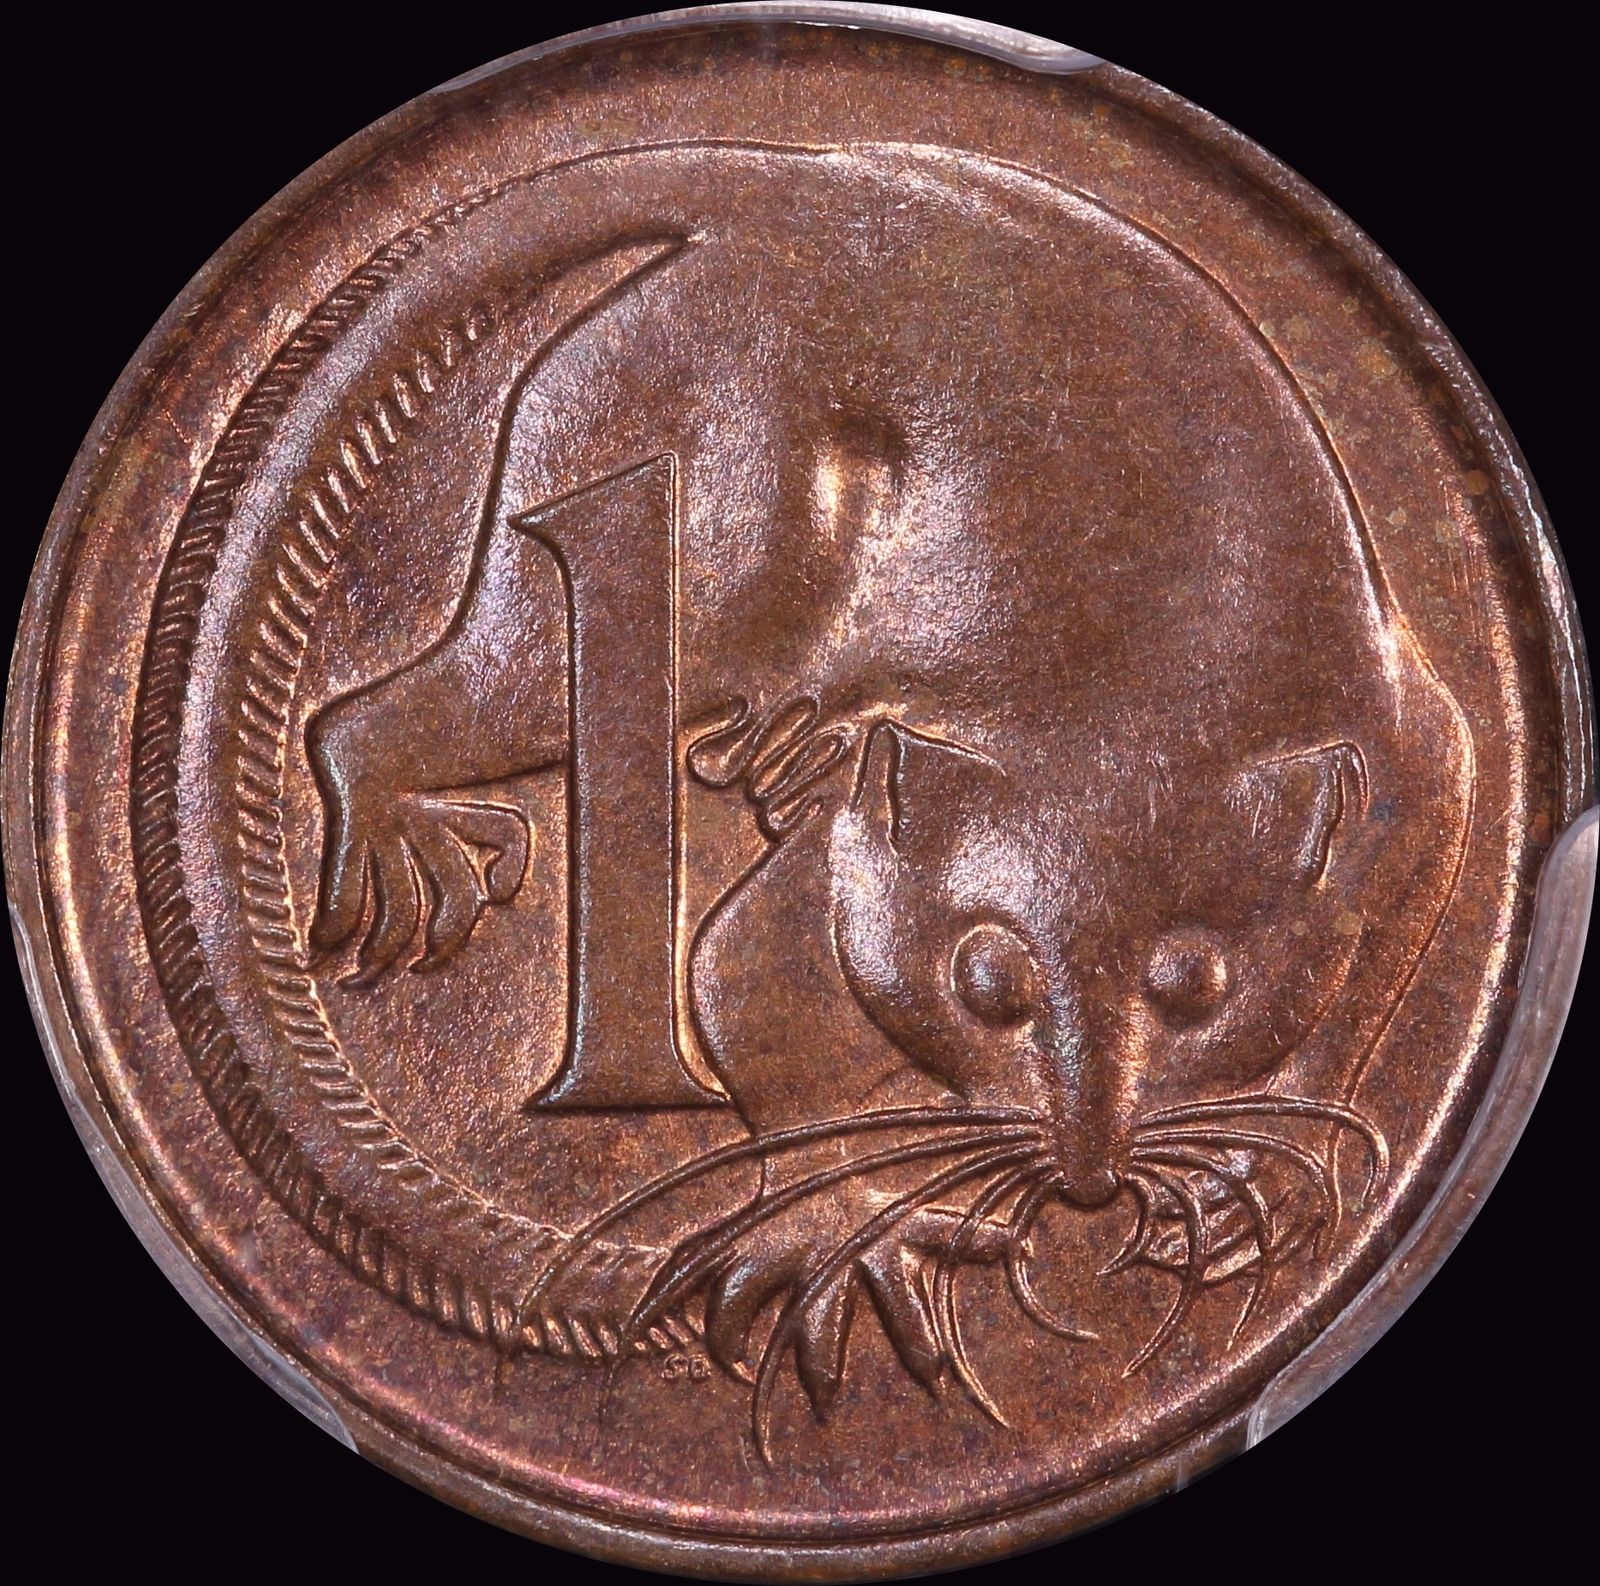 1966 Perth Mint One Cent Choice Unc (MS 63RB) product image